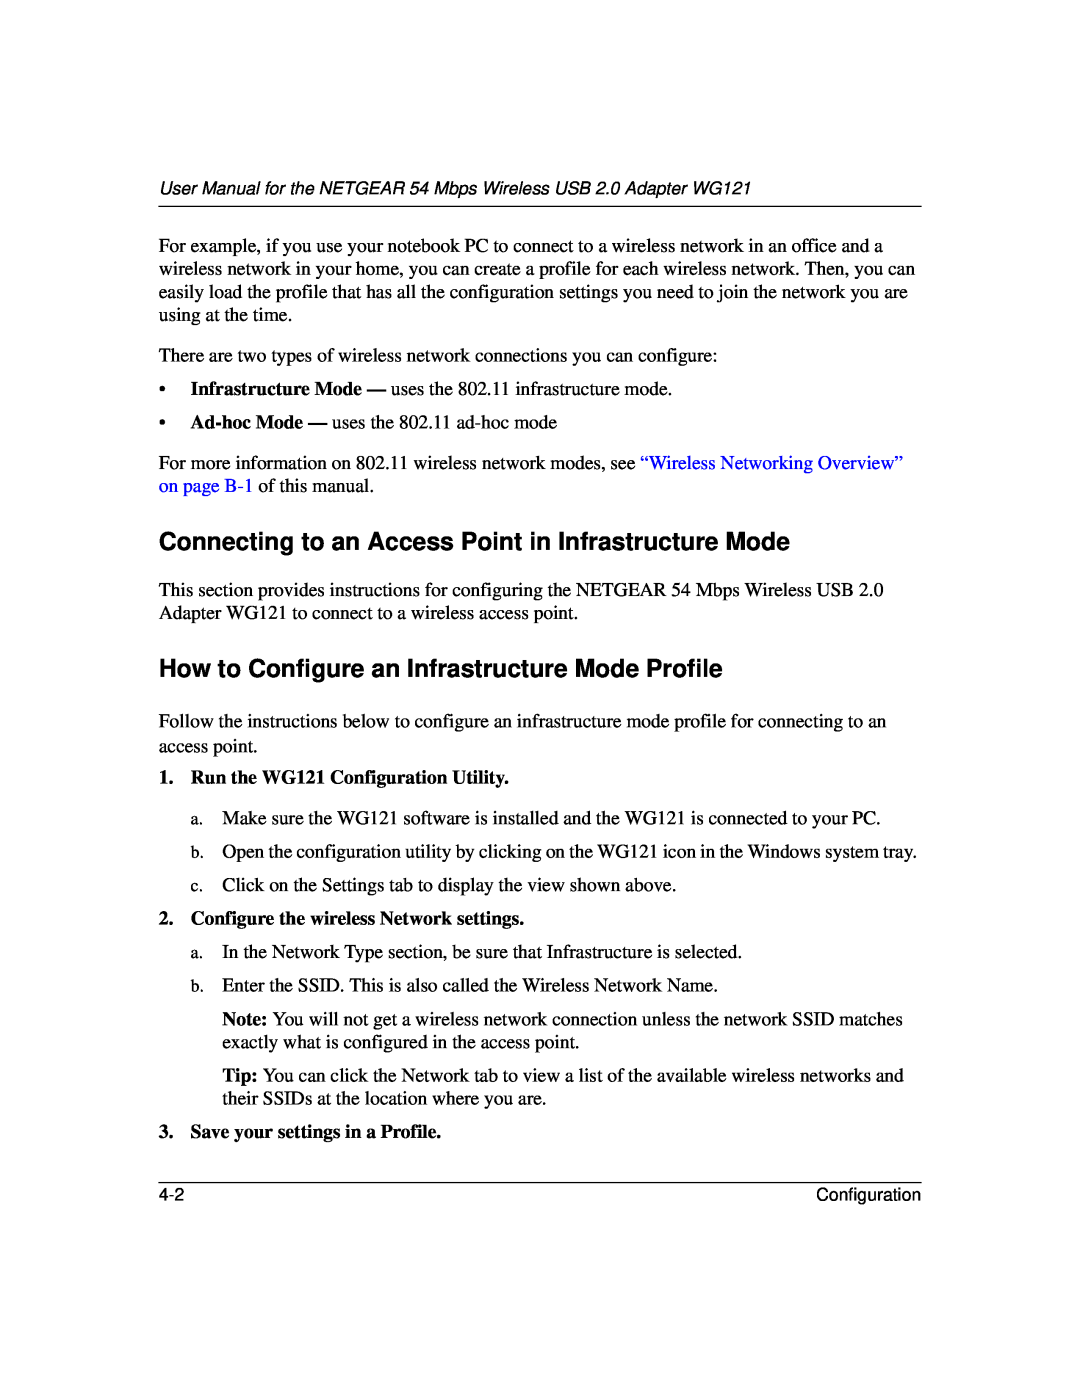 NETGEAR WG121 Connecting to an Access Point in Infrastructure Mode, How to Configure an Infrastructure Mode Profile 